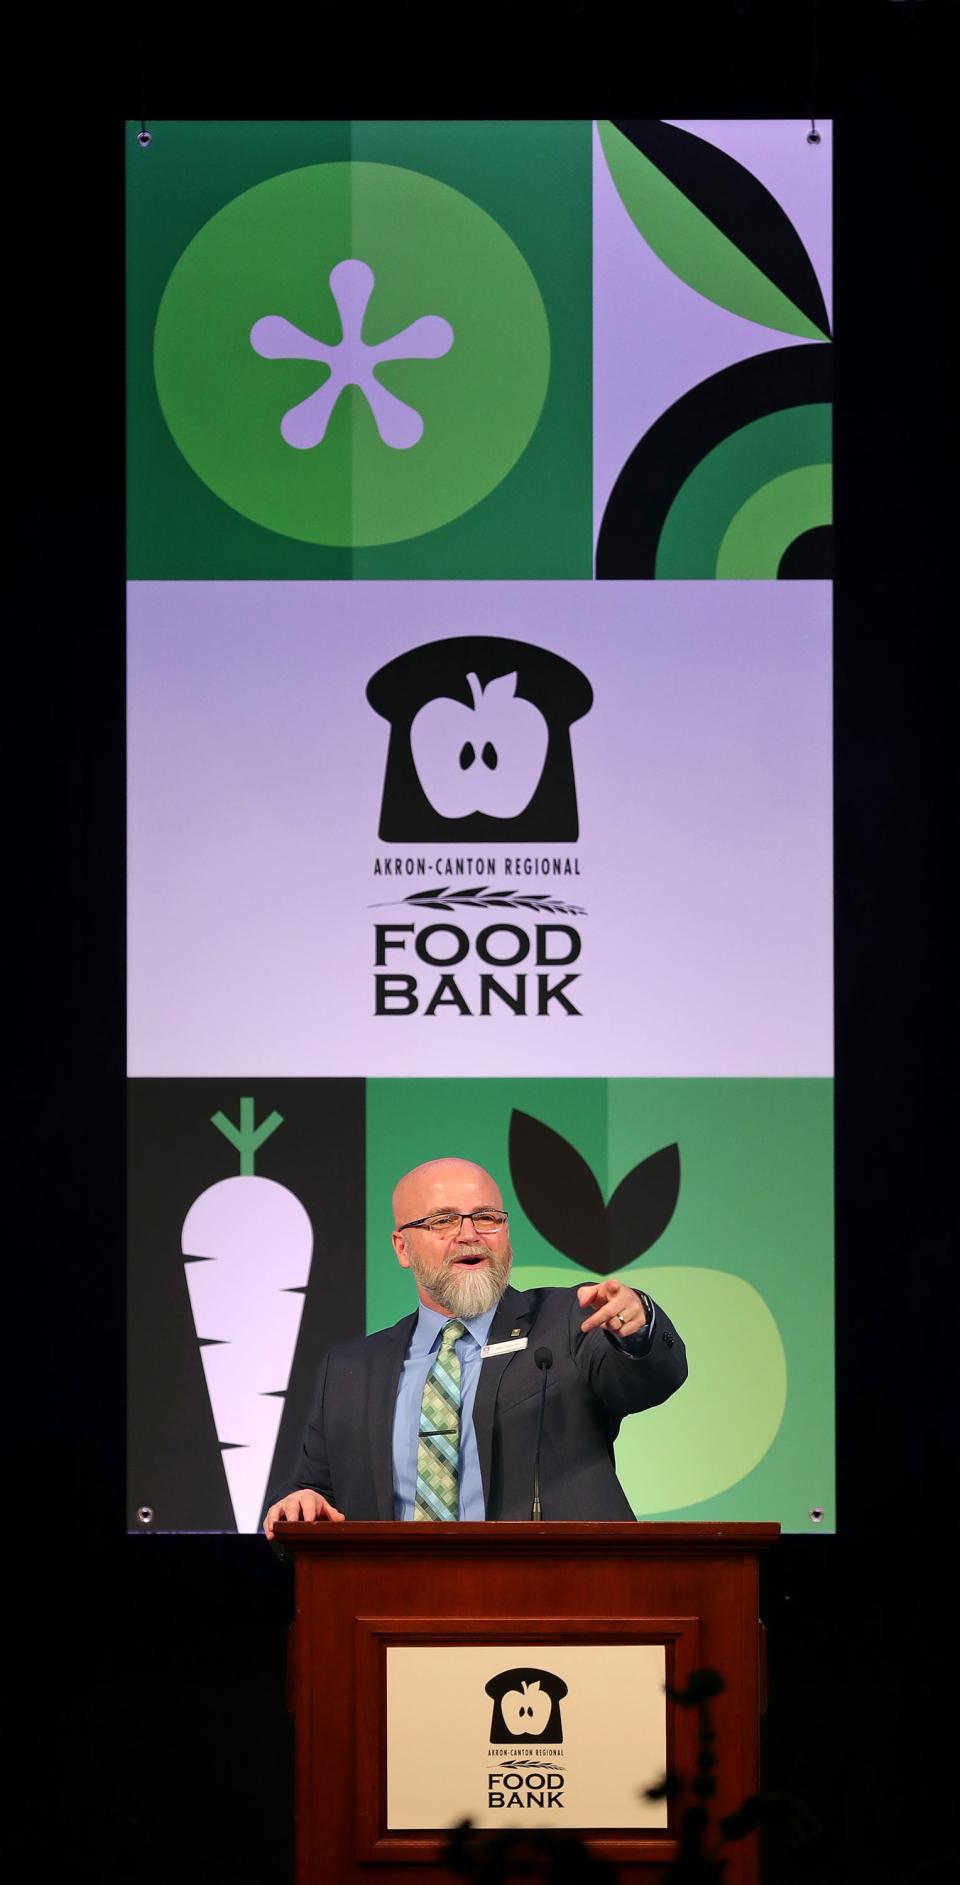 Akron-Canton Regional Foodbank President and CEO Dan Flowers addresses the audience during the Akron-Canton Regional Foodbank's Harvest for Hunger campaign kickoff breakfast Tuesday at the John S. Knight Center in Akron.